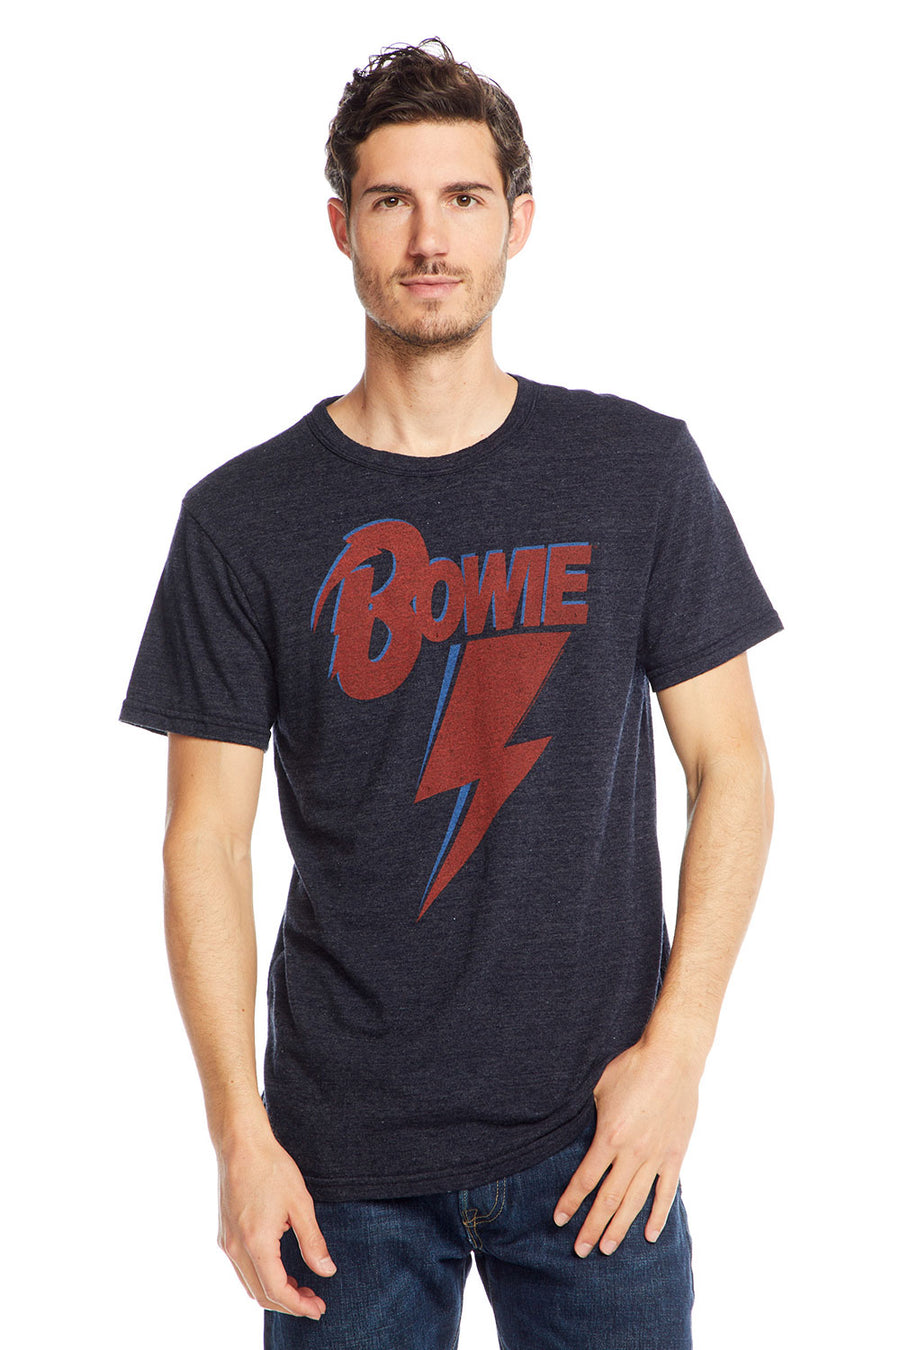 David Bowie - Bowie Bolt MENS - chaserbrand